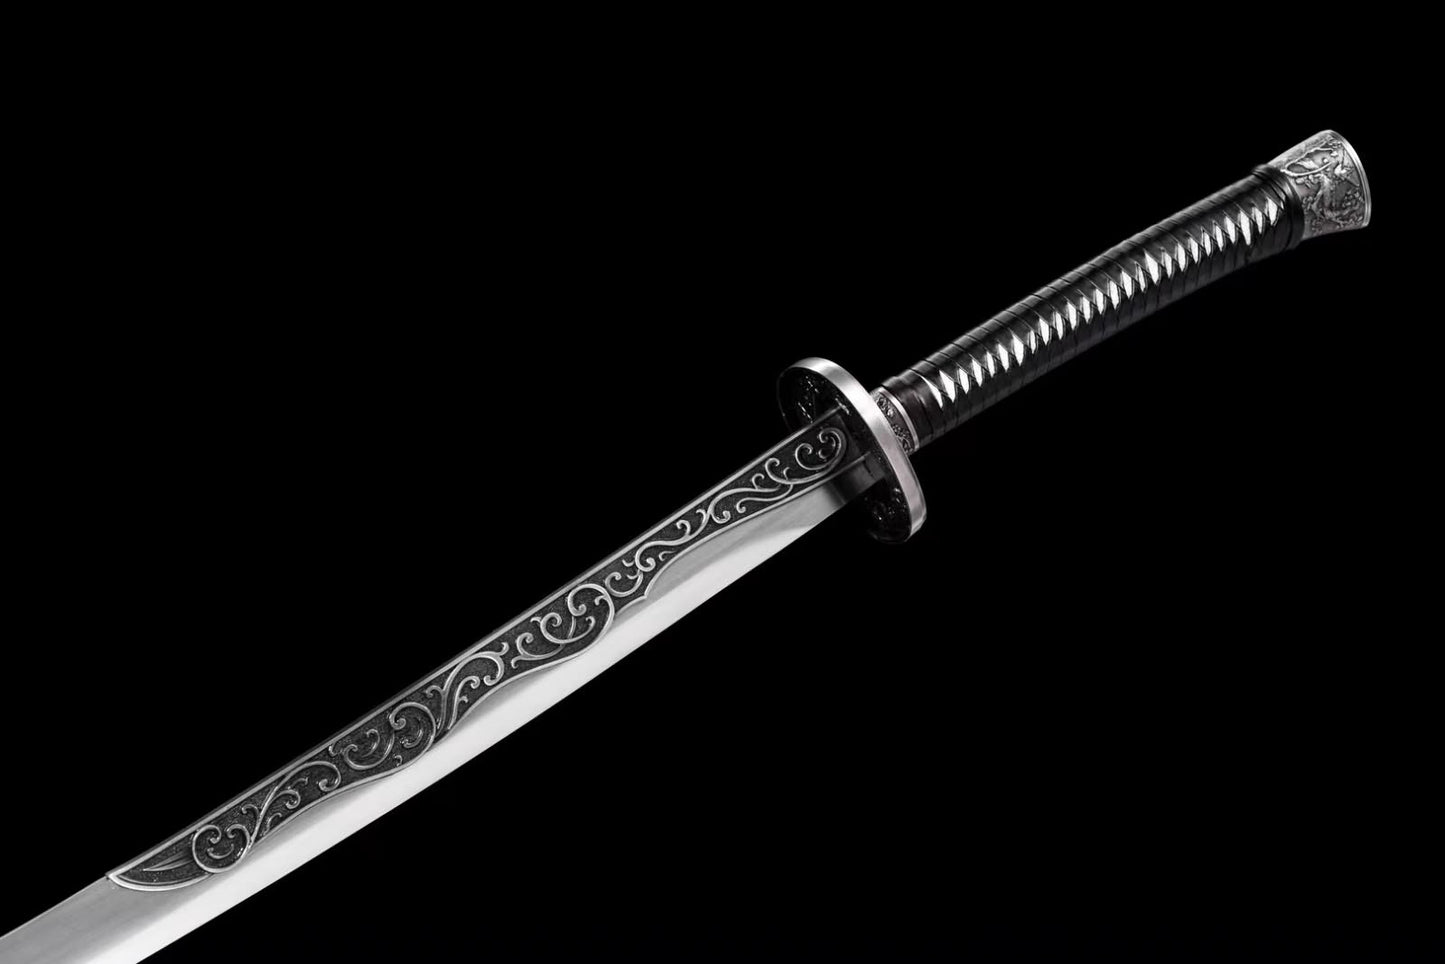 Authentic Chinese Plum Blossom Qing Dao Sword-High Carbon Steel Blade